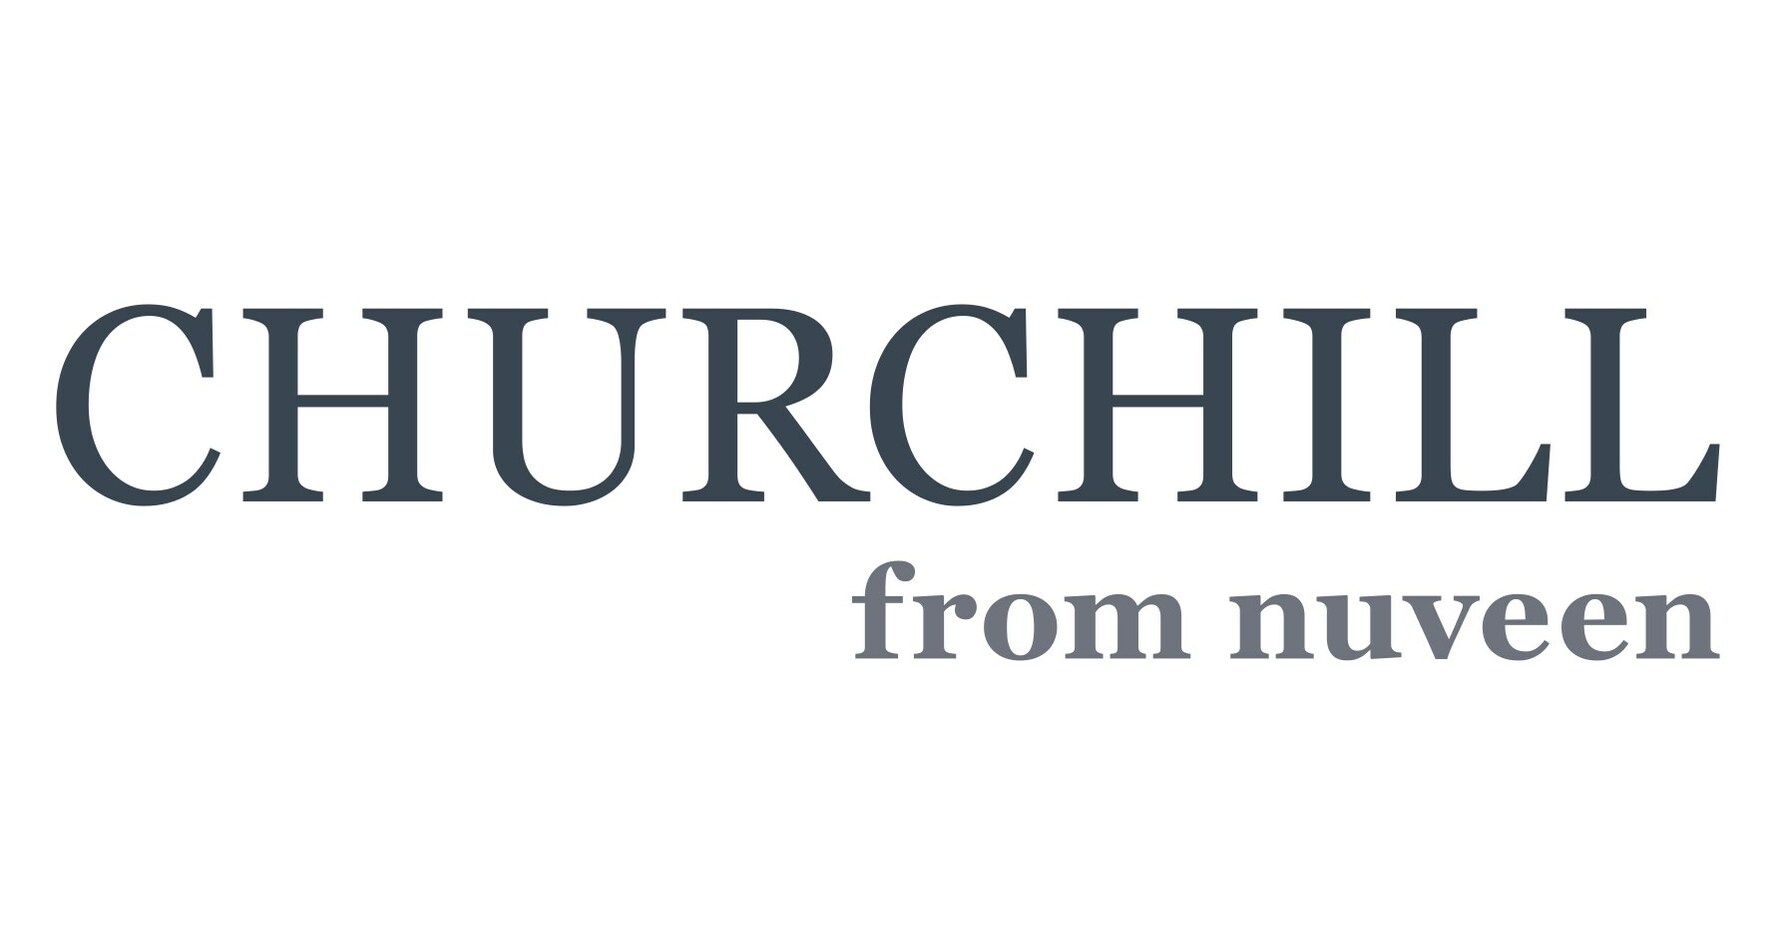 New Business Development Company from Nuveen and Churchill Offers Individual Investors Private Capital Opportunities in U.S. Middle Market